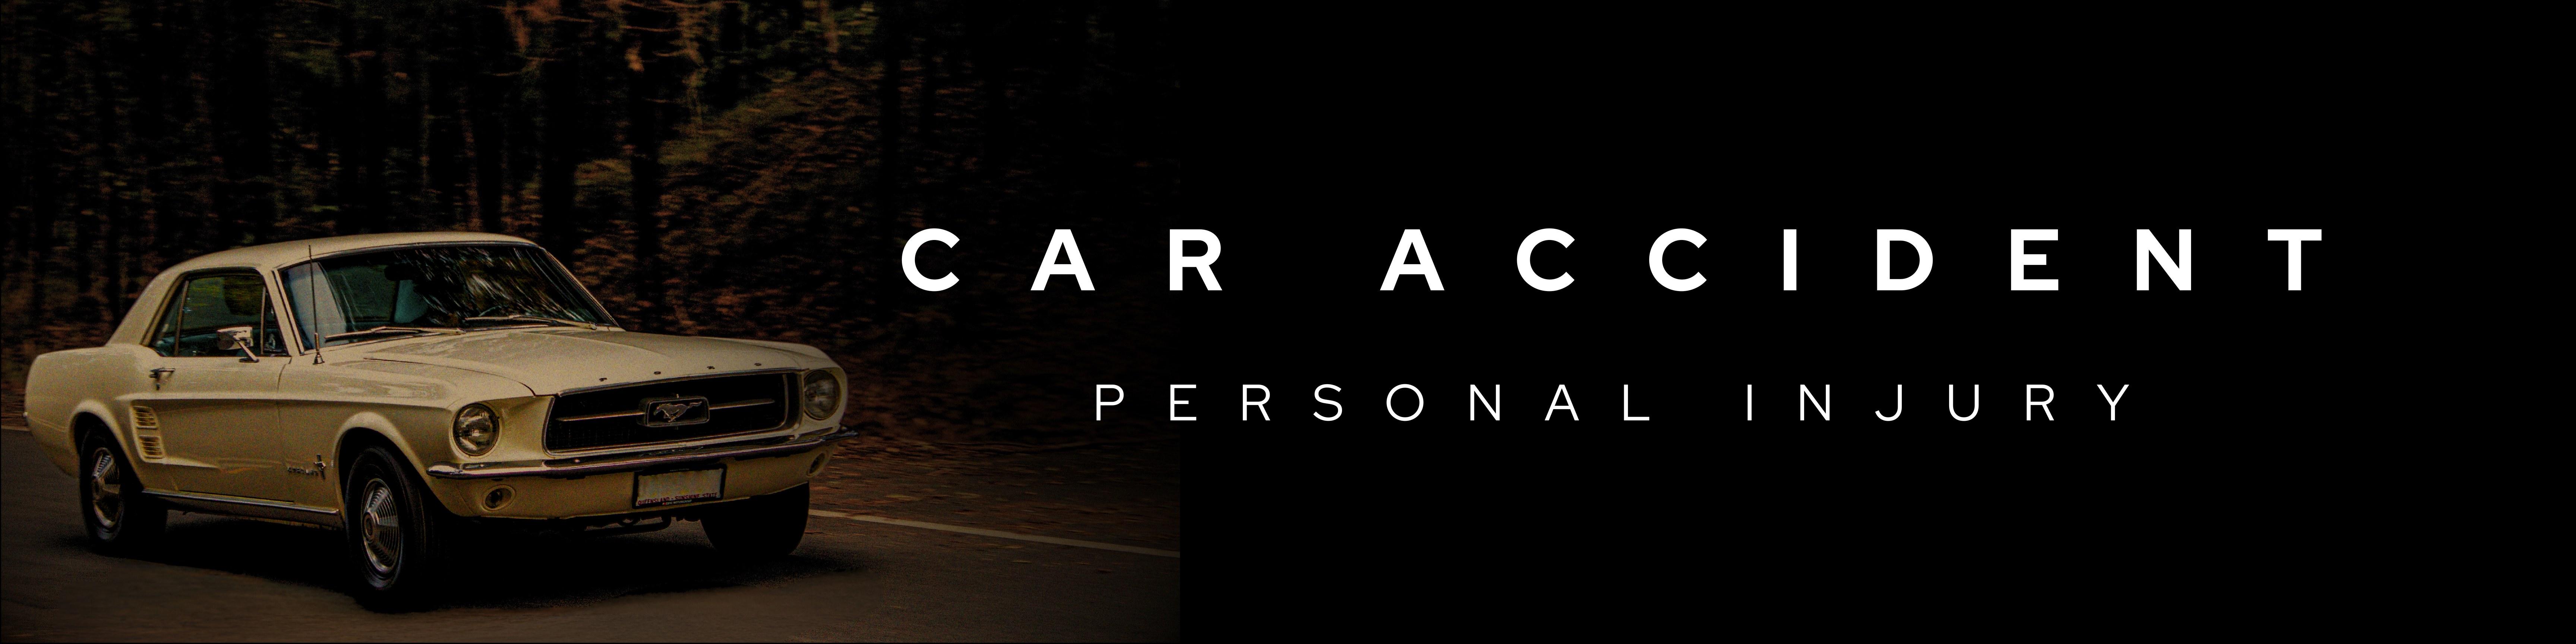 Decorative banner image with a picture of a car driving down the road and fading to black. Against the black backdrop are the words "Car Accident Personal Injury"